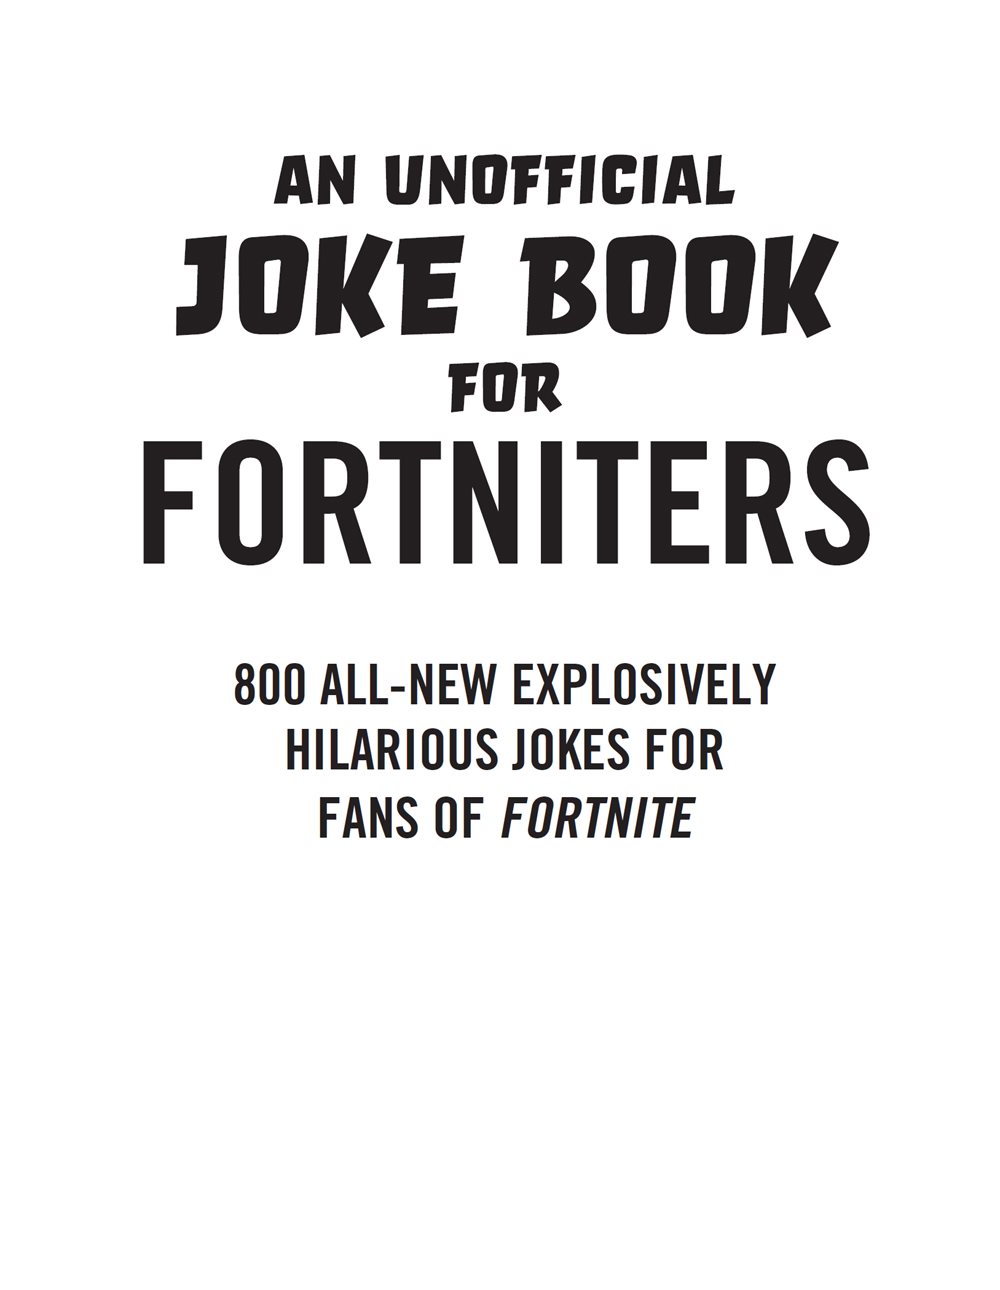 This book is not authorized or sponsored by Epic Games Inc Fortnite or any - photo 2